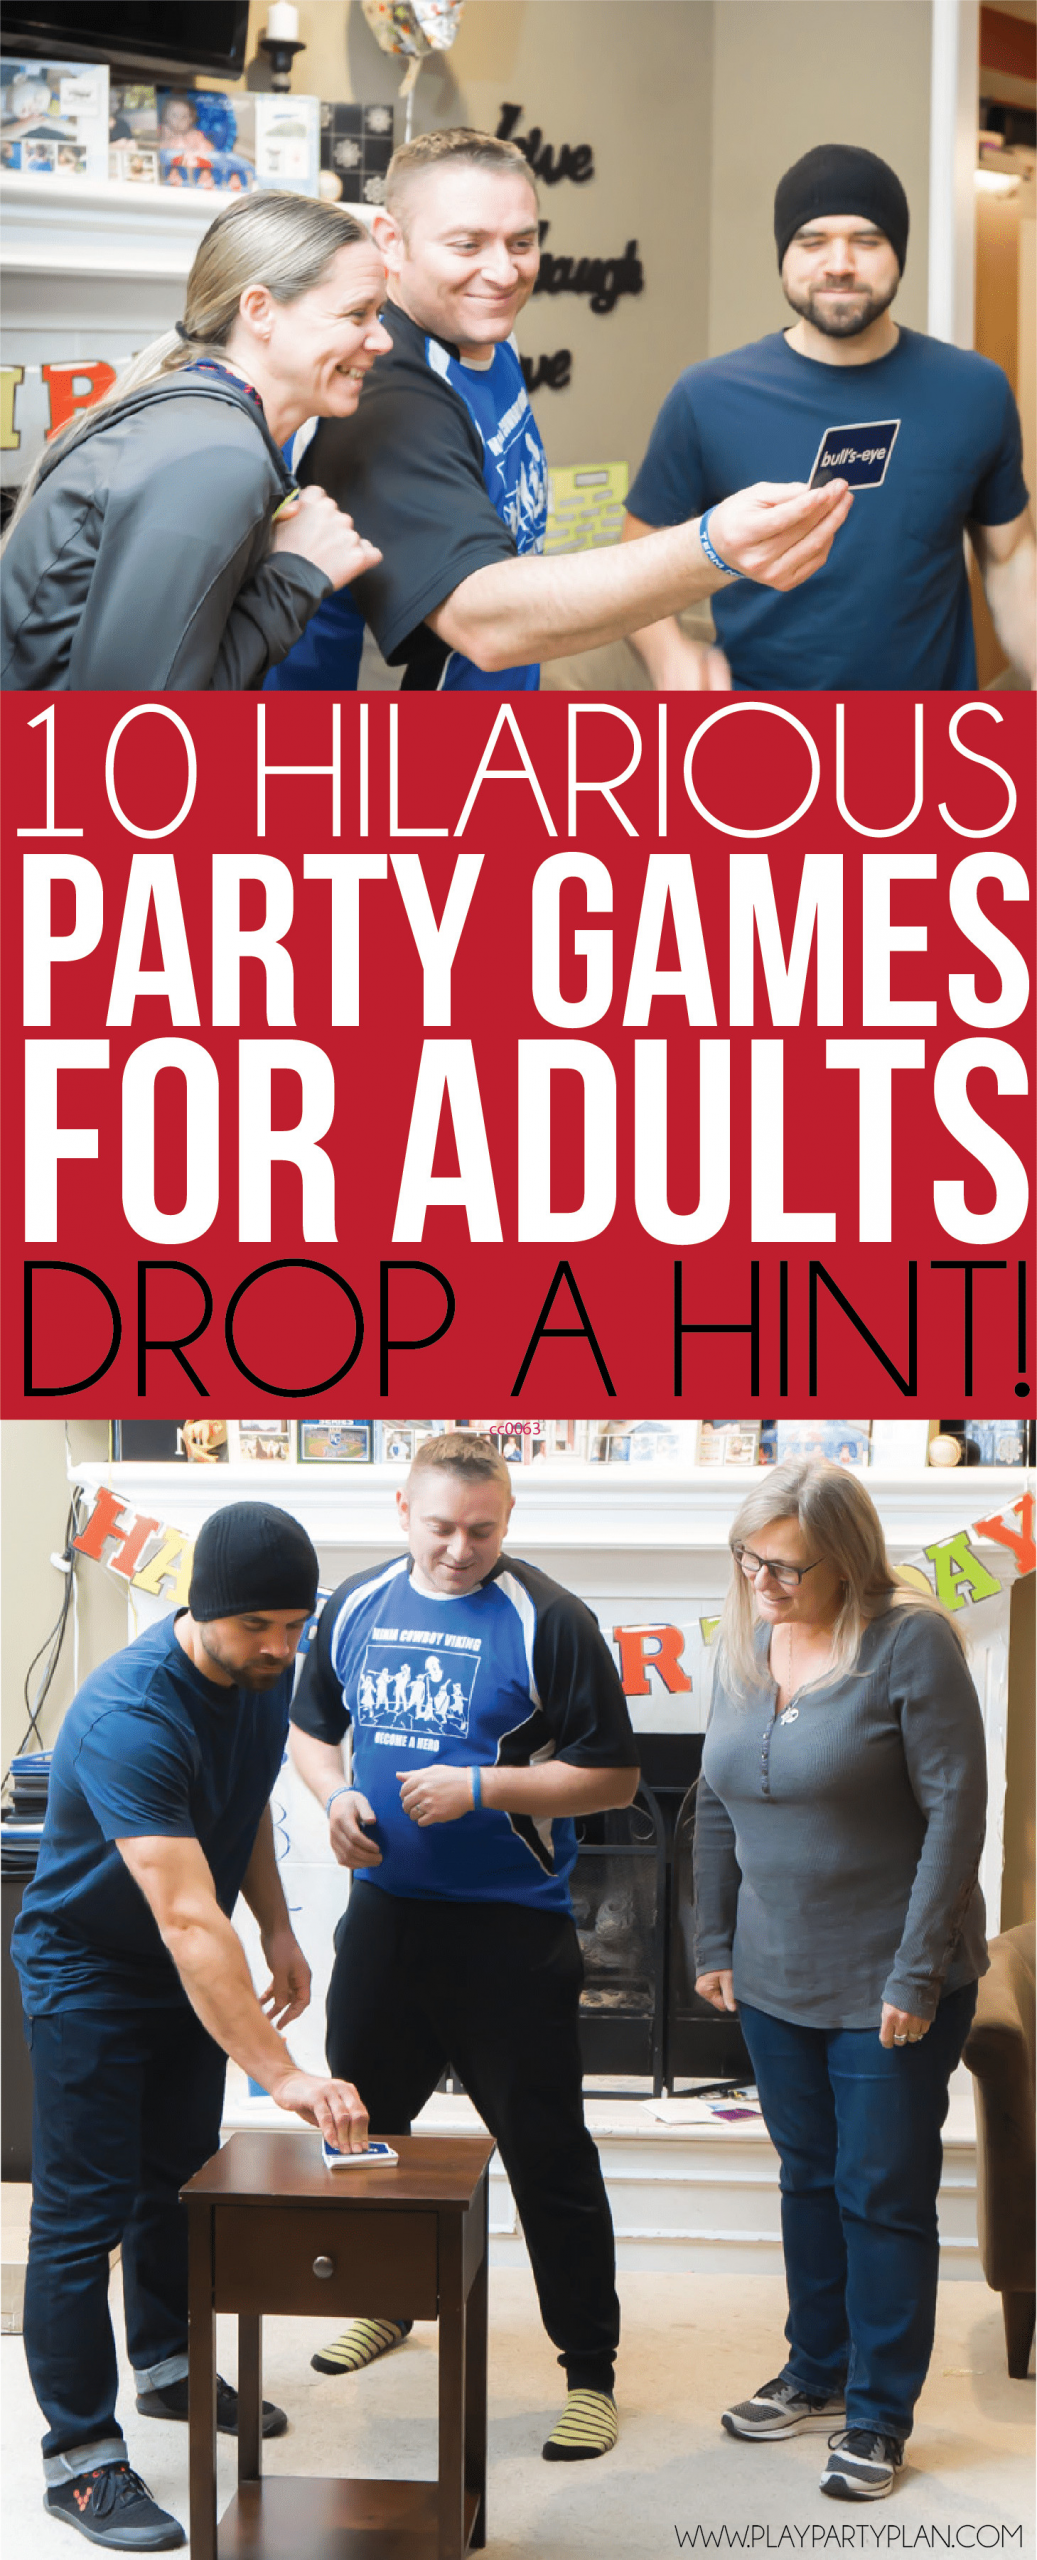 Fun Ideas For Adults
 19 Hilarious Party Games for Adults Play Party Plan